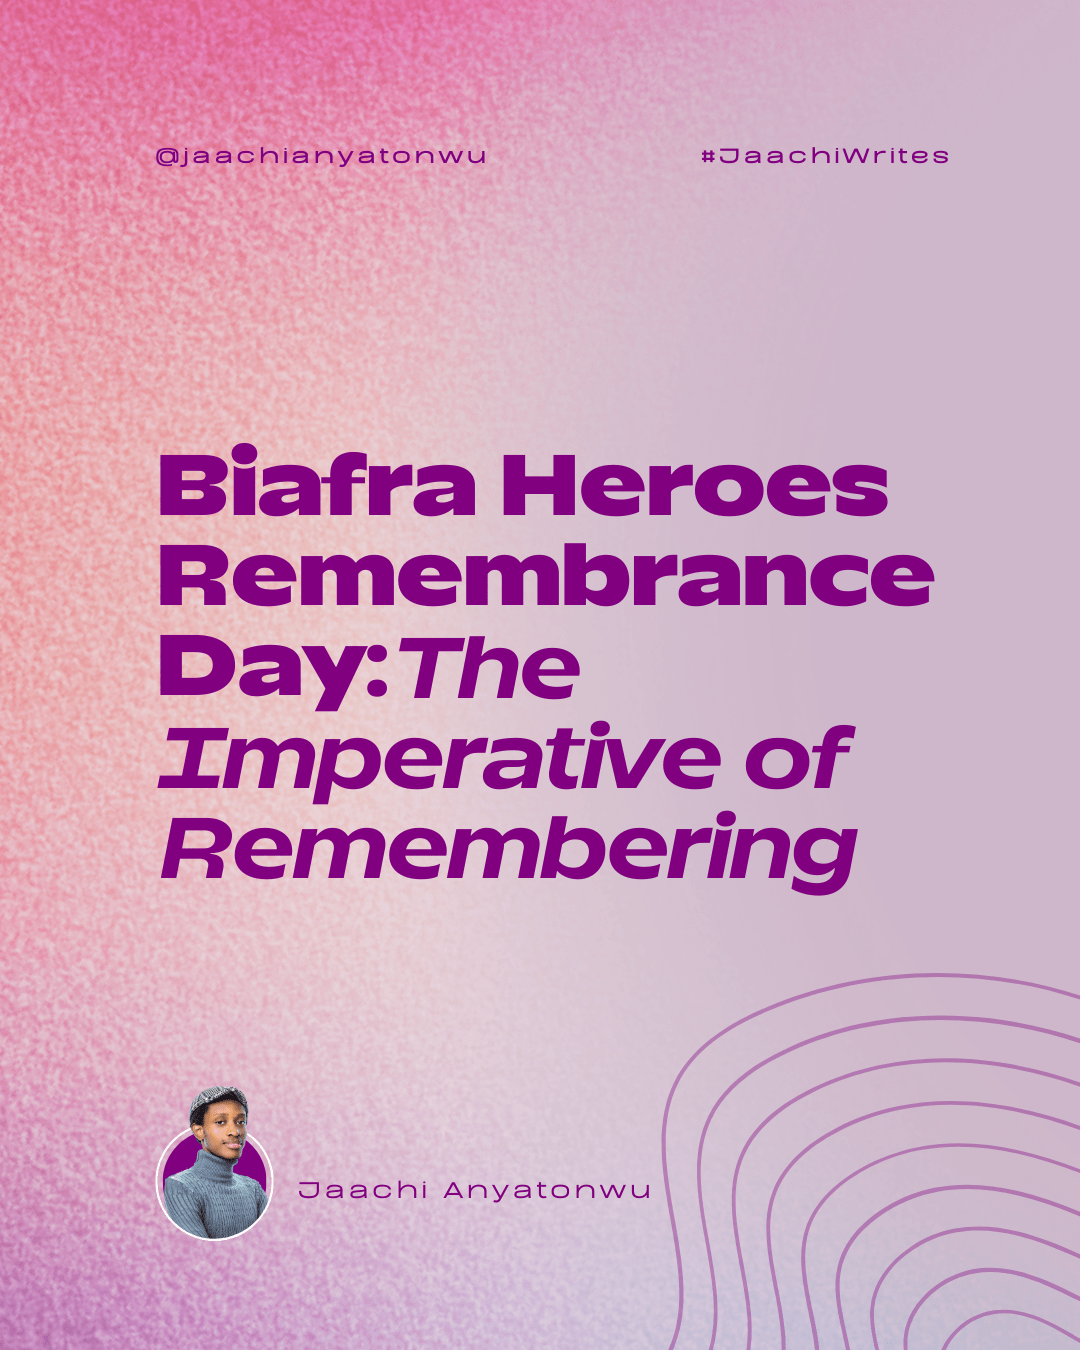 Biafra Heroes Remembrance Day: The Imperative of Remembering